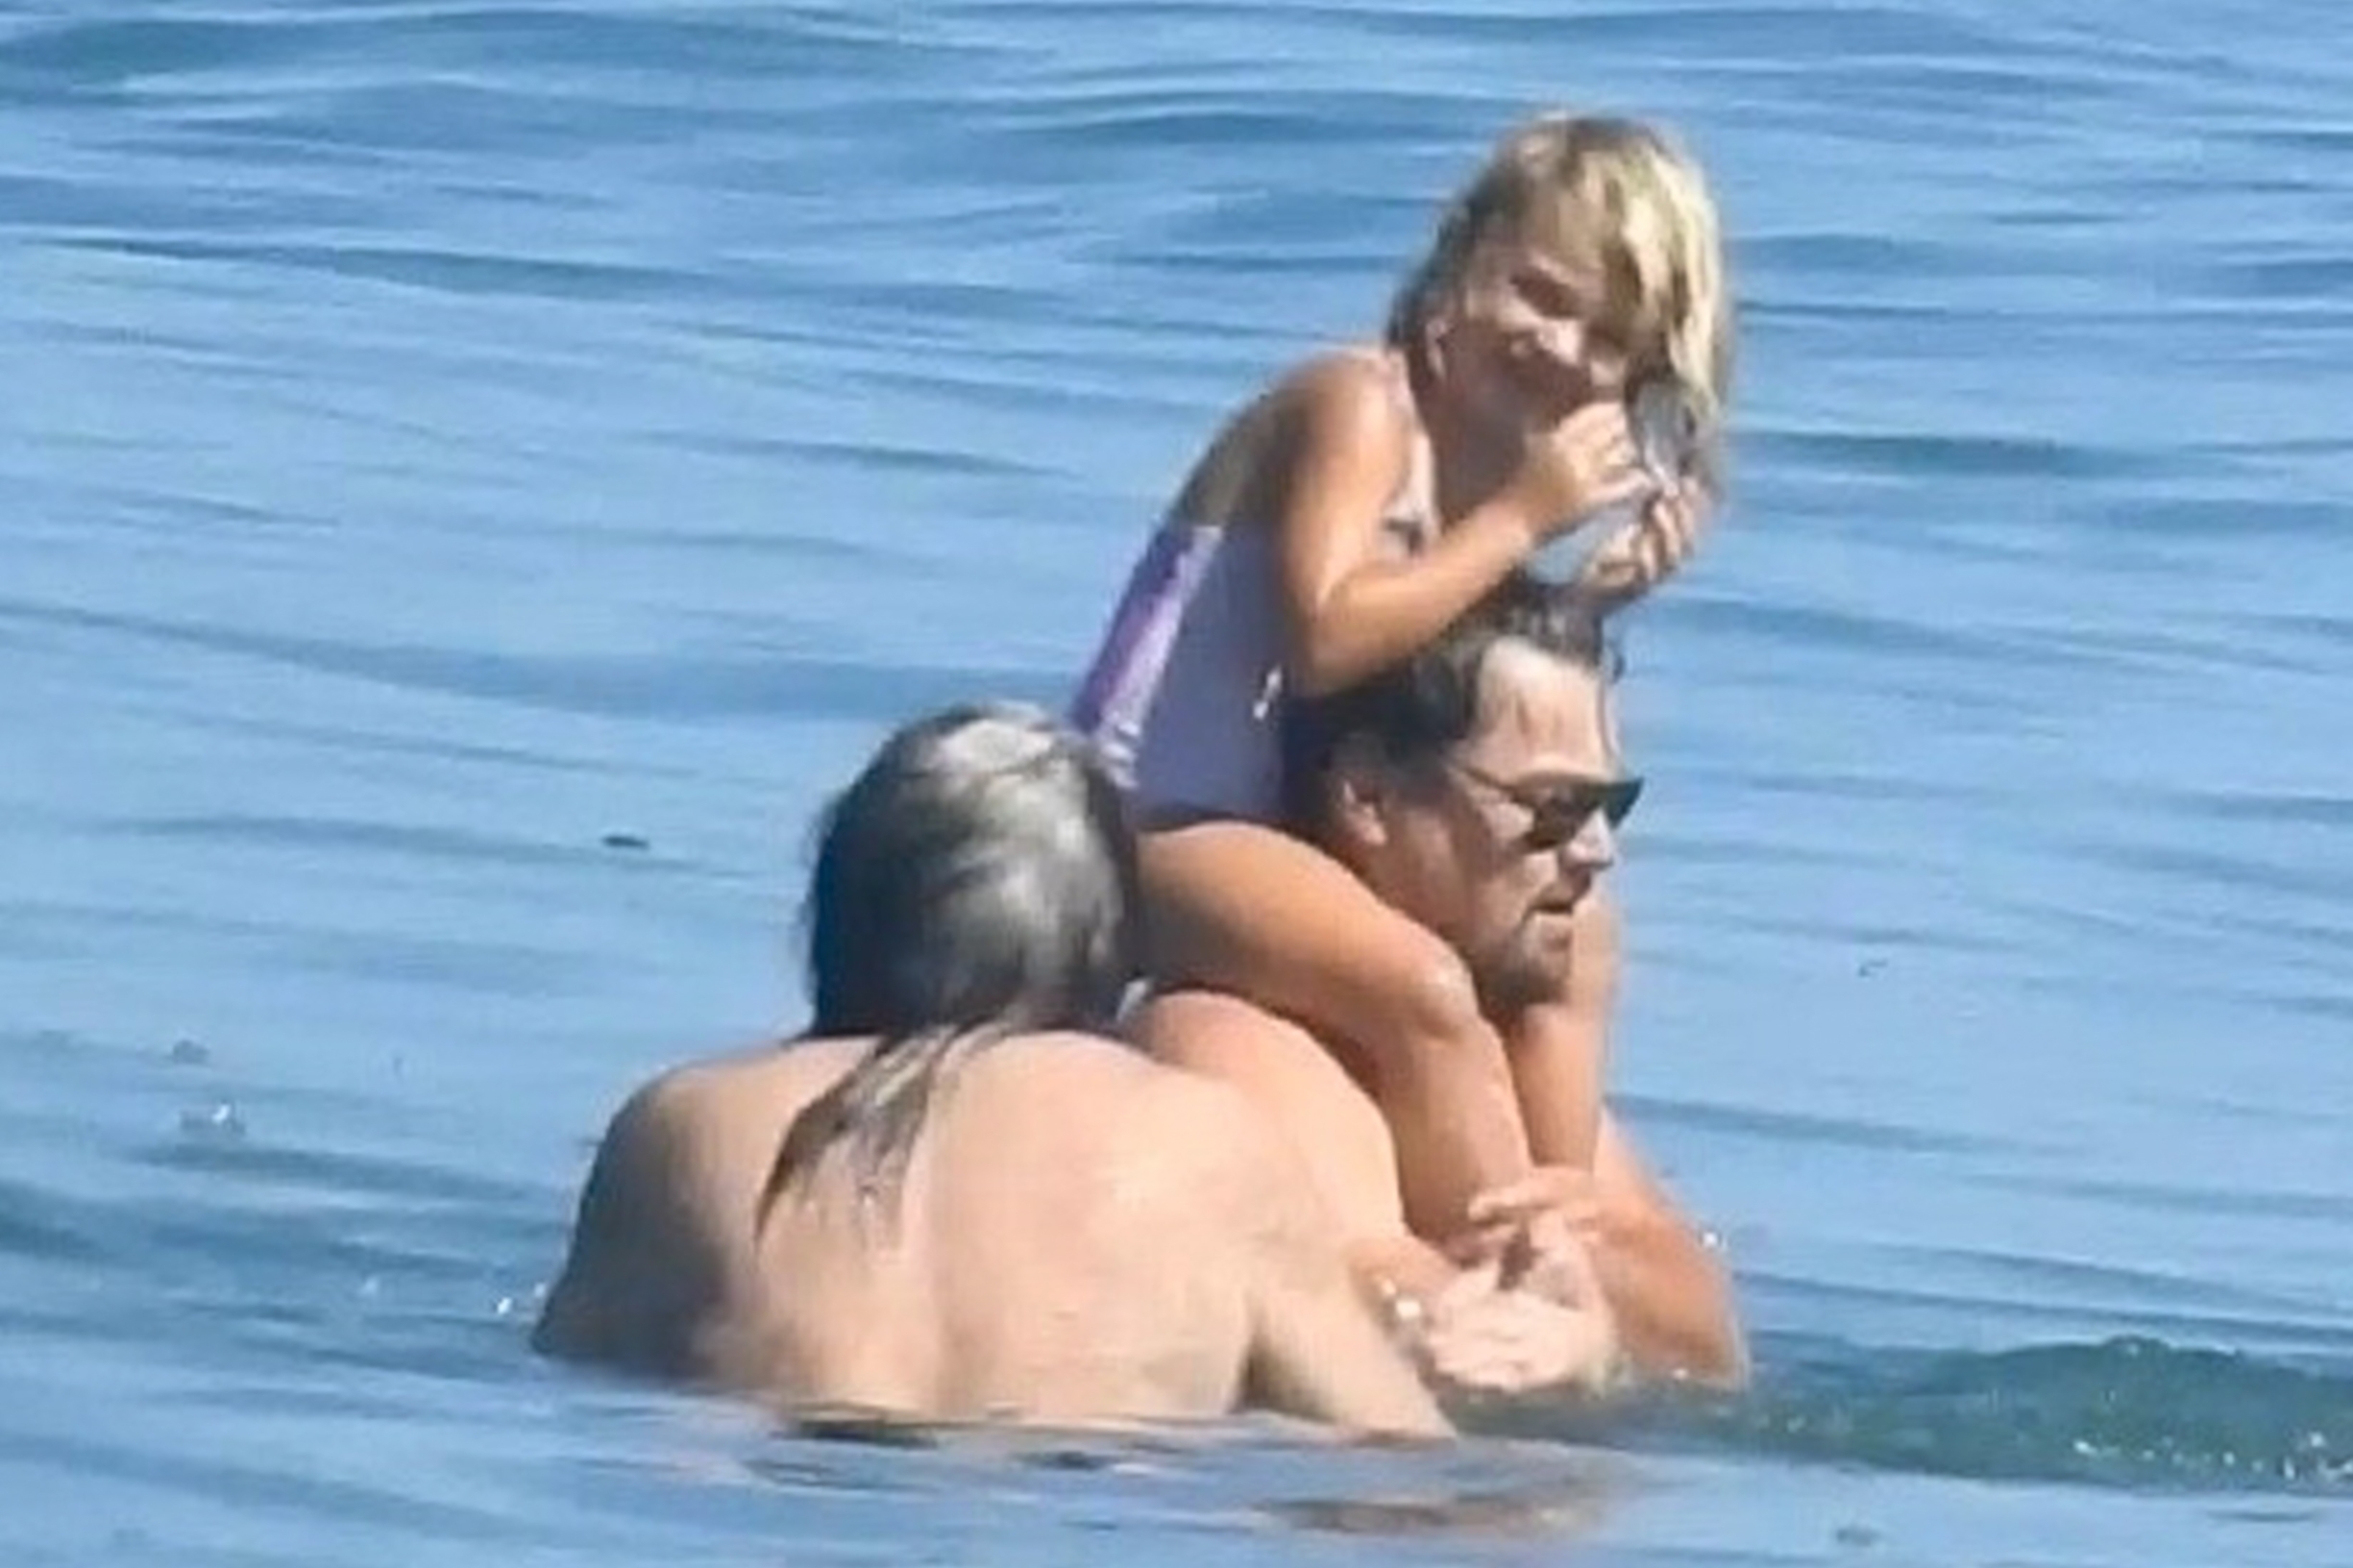 Malibu, CA  - *EXCLUSIVE*  - Leonardo DiCaprio cools off in the ocean while enjoying a fun summer day at the beach with his family in Malibu.

BACKGRID USA 14 AUGUST 2020,Image: 552613286, License: Rights-managed, Restrictions: , Model Release: no, Credit line: RMBI / BACKGRID / Backgrid USA / Profimedia